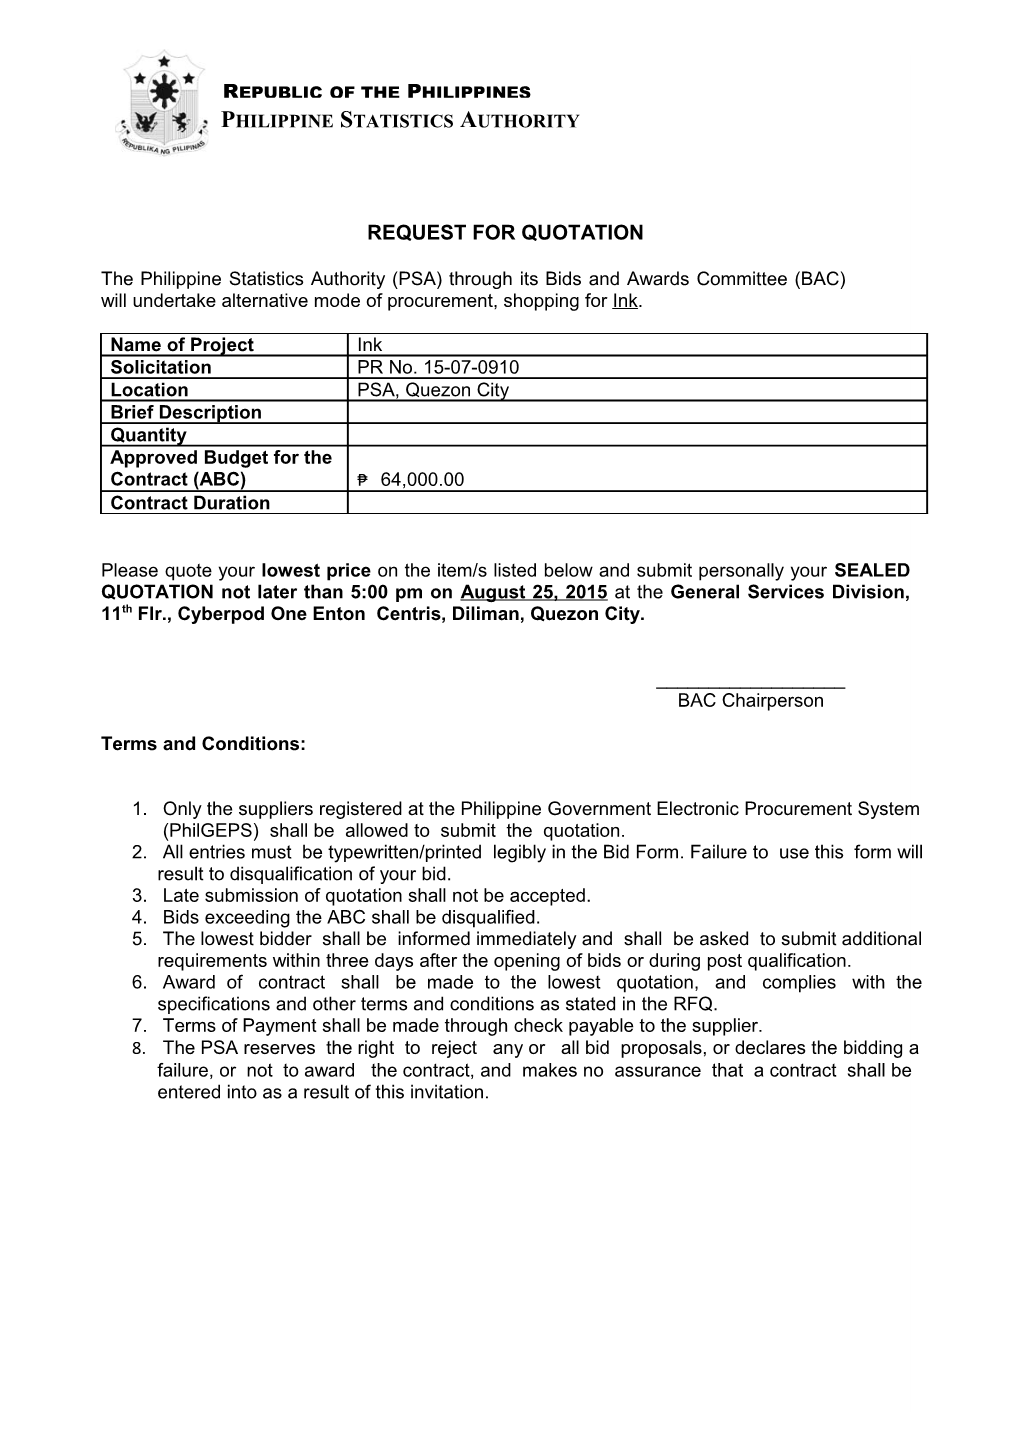 Request for Quotation s36